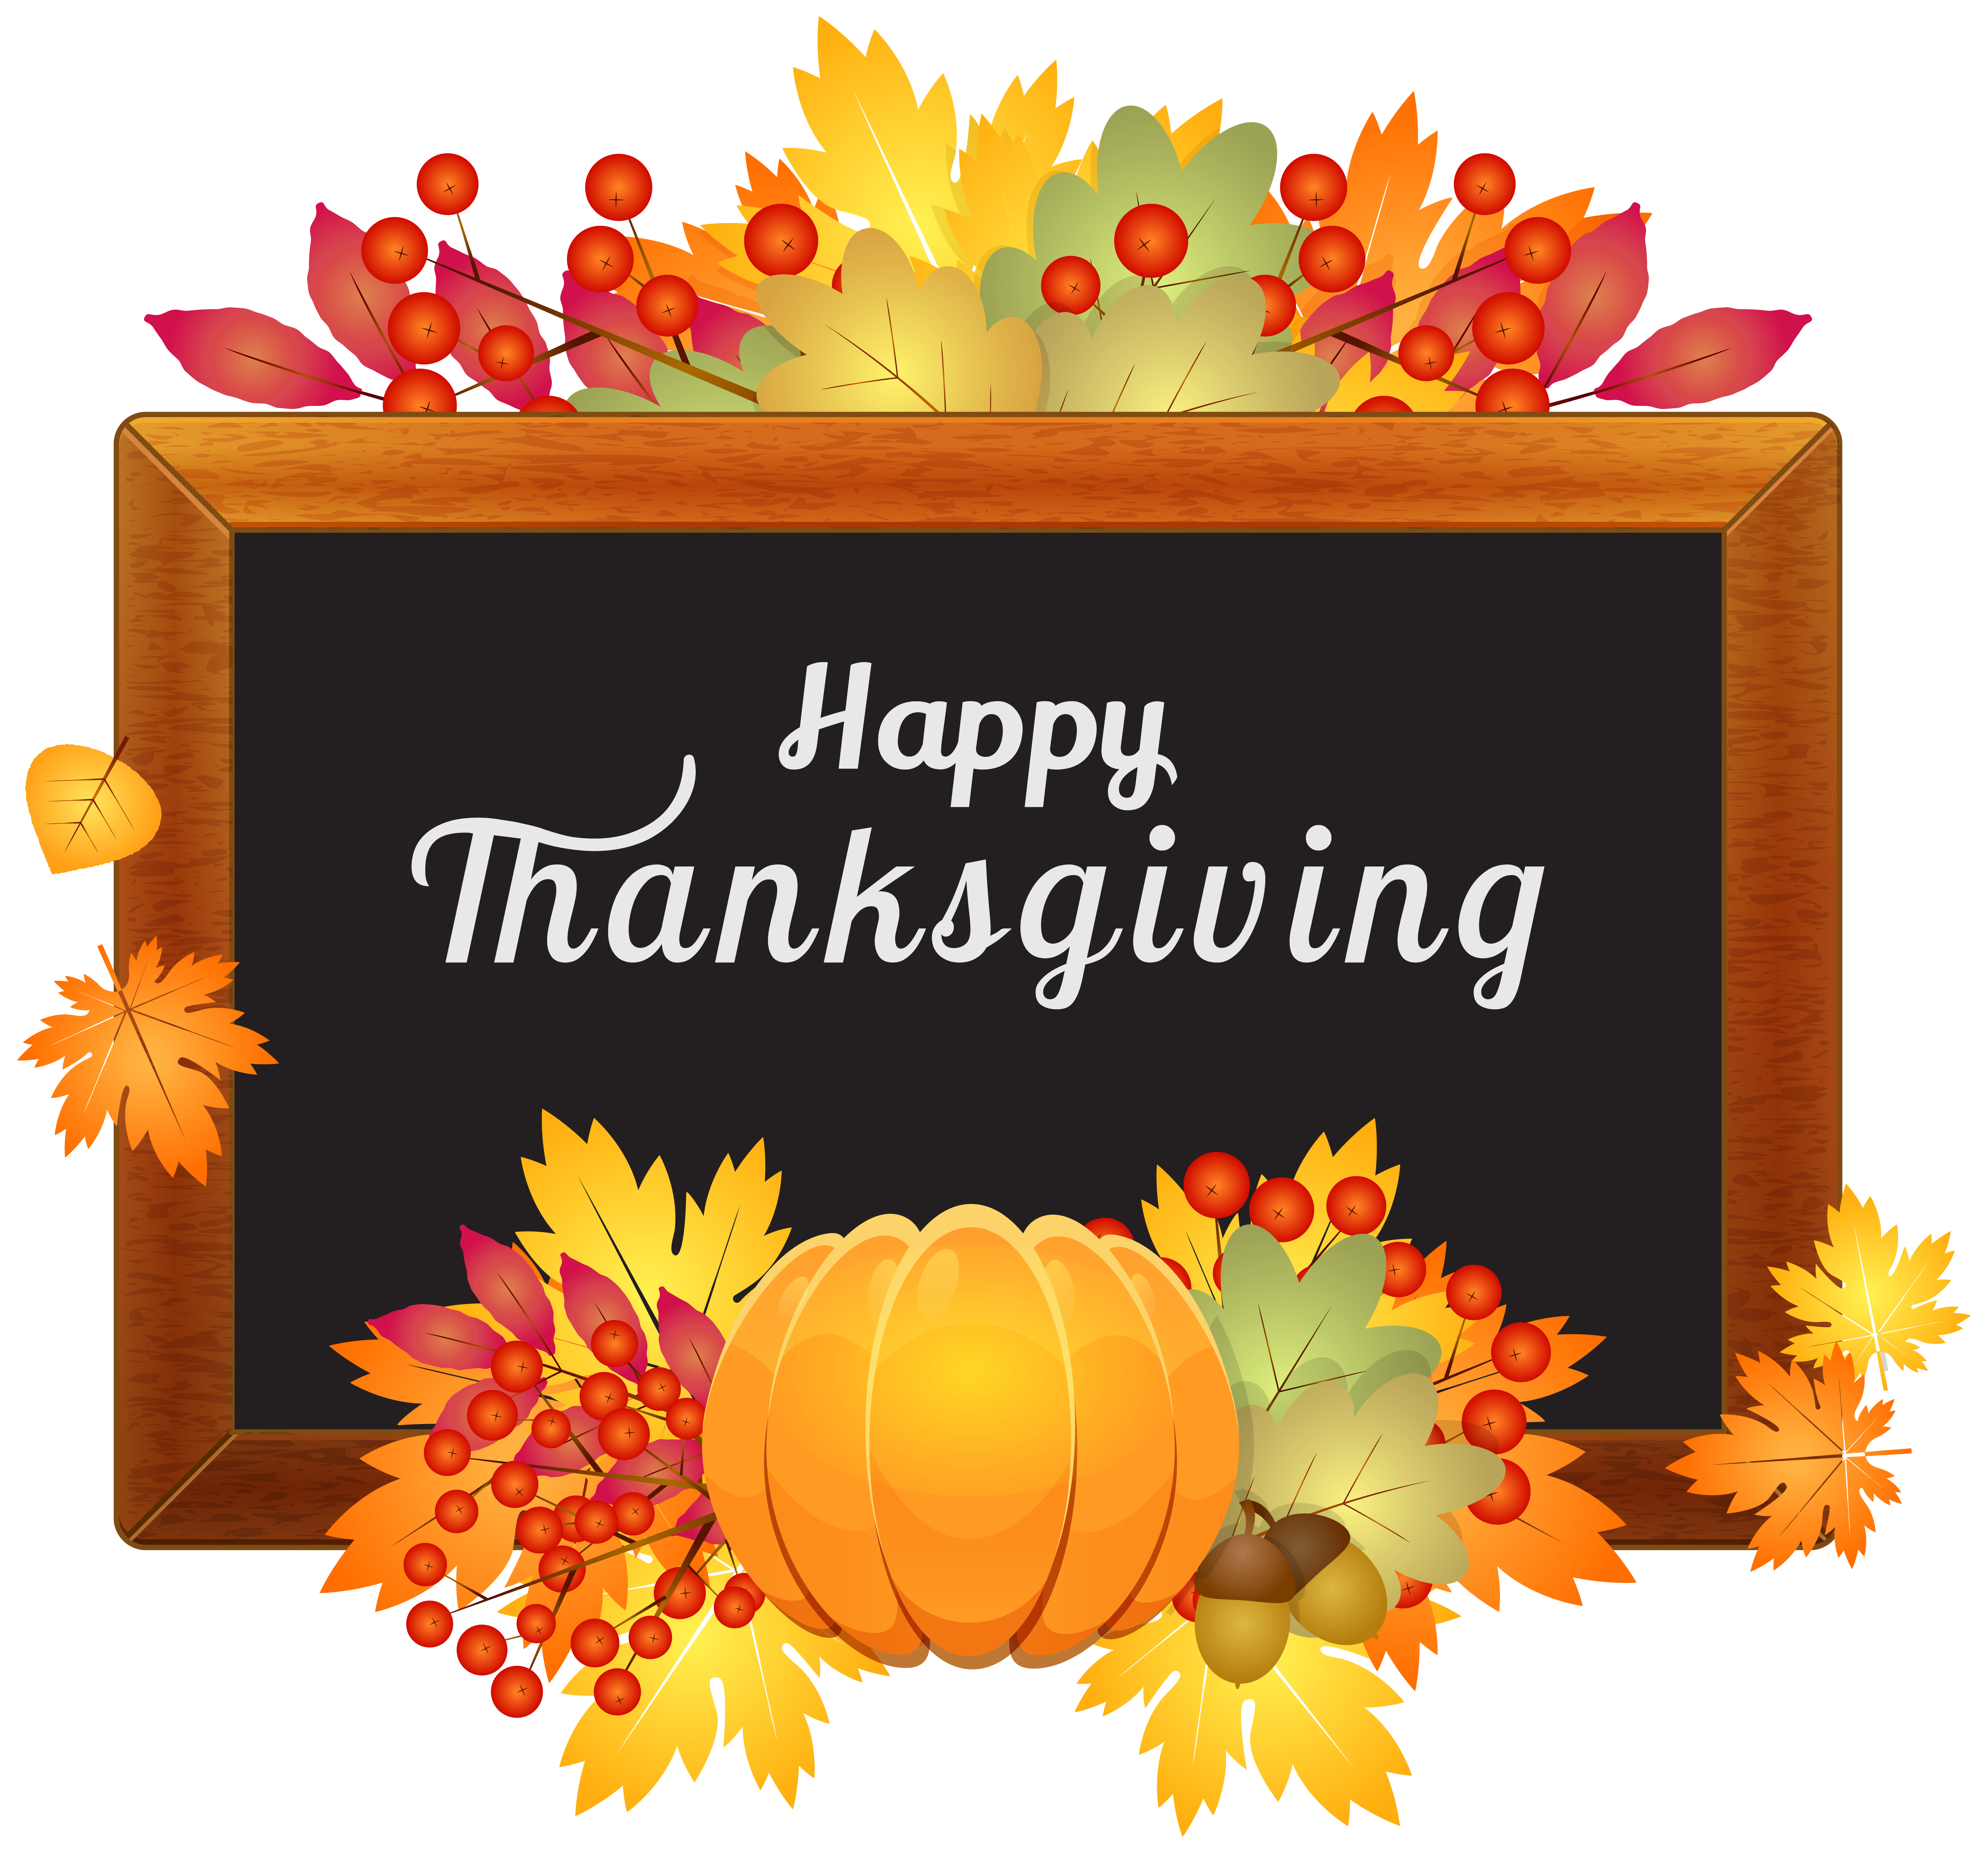 Thanks PNG HD Images - 124795